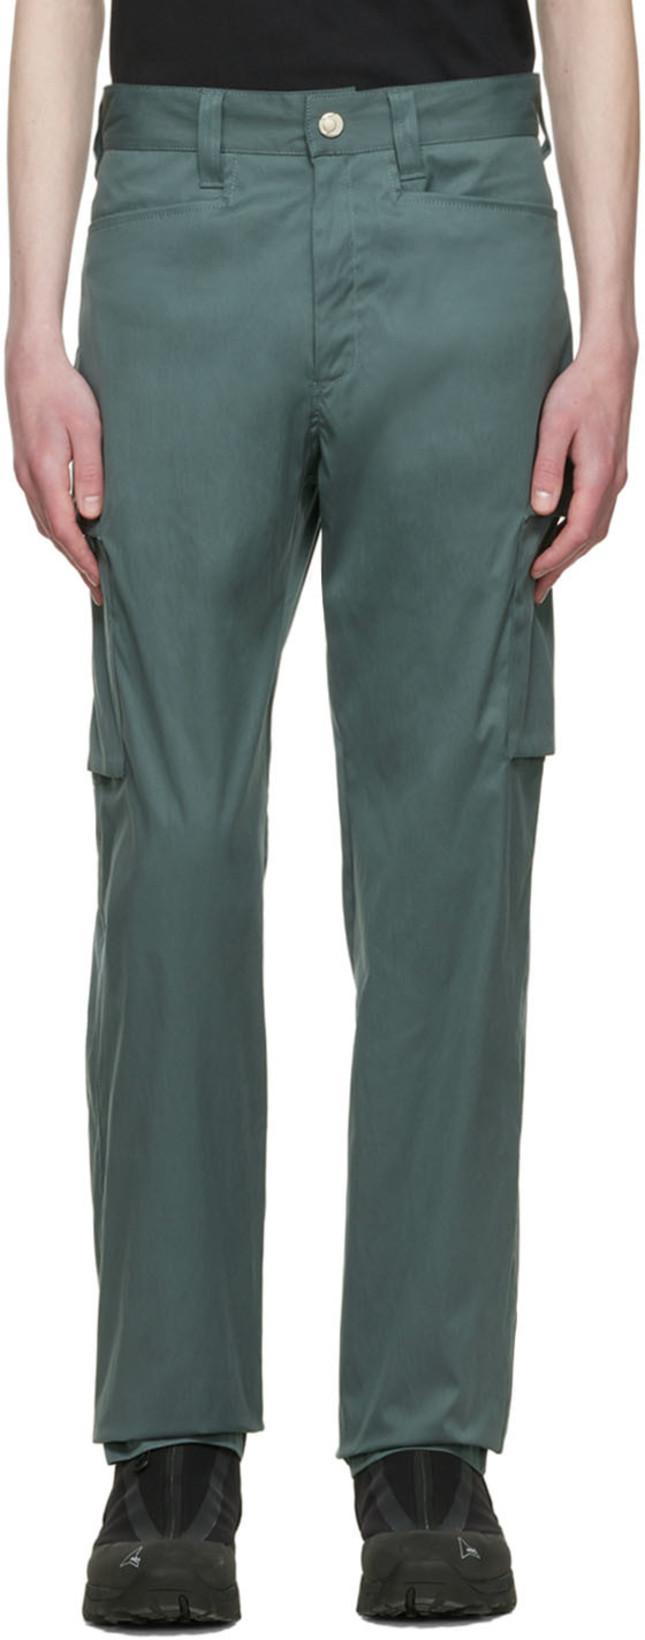 Blue Tapered Fit Cargo Pants by AFFXWRKS